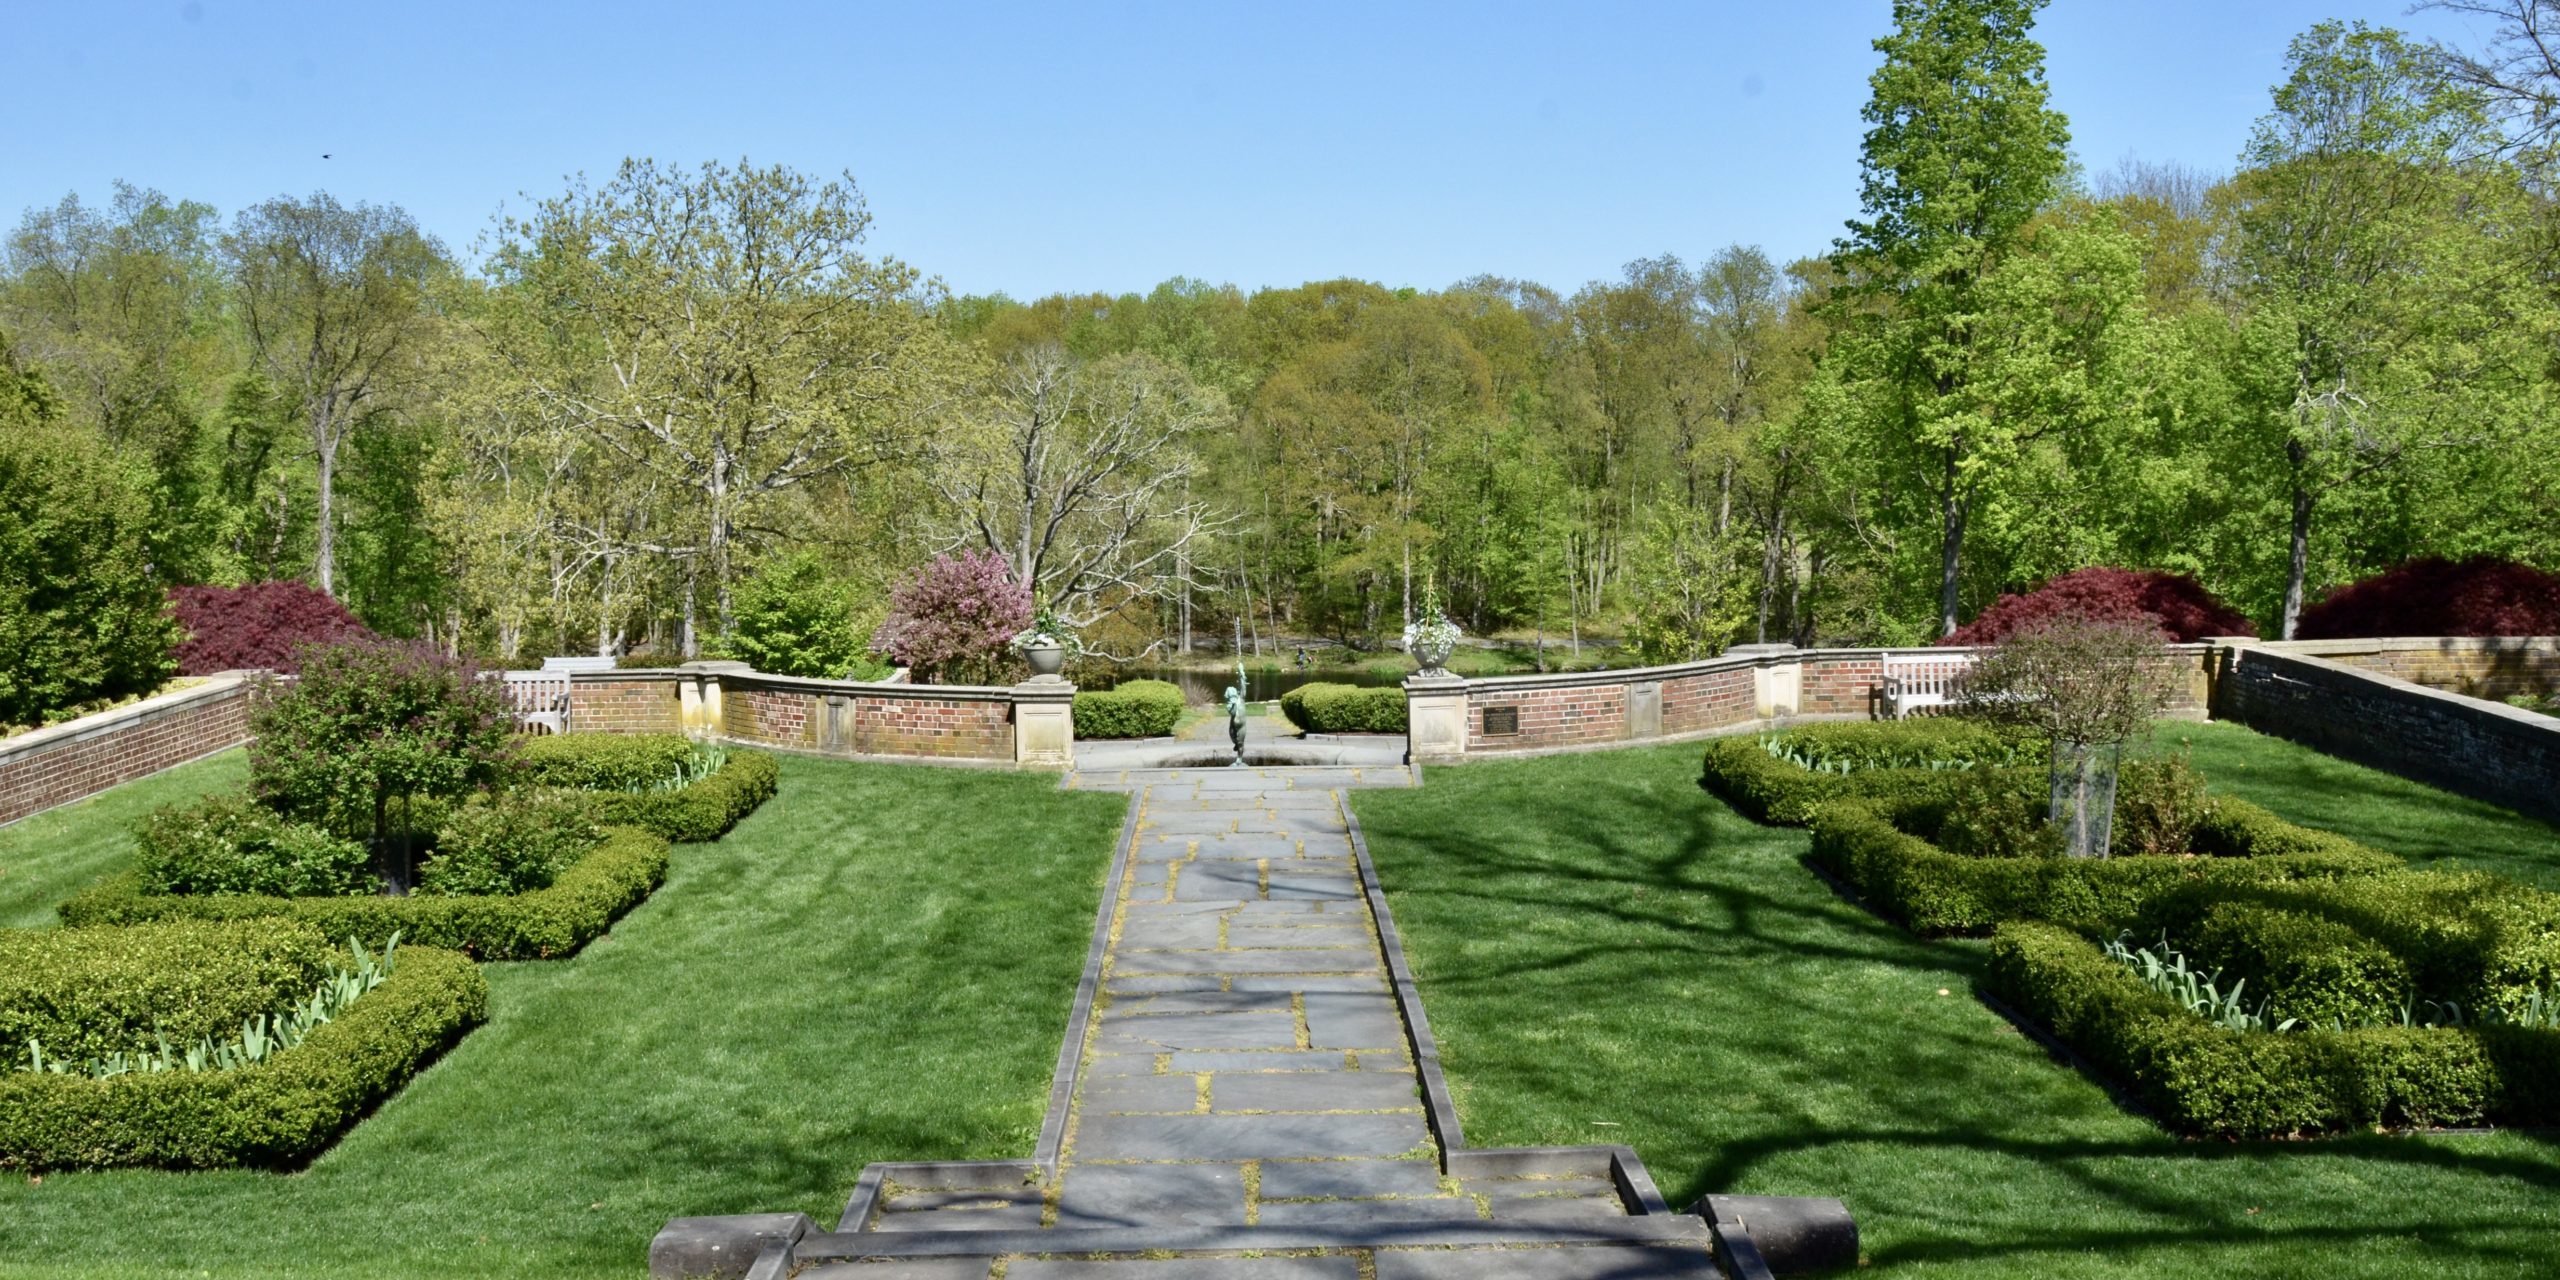 Waveny-Park-Center-Formal-Gardens-Image-By-Carrie-Corcoran